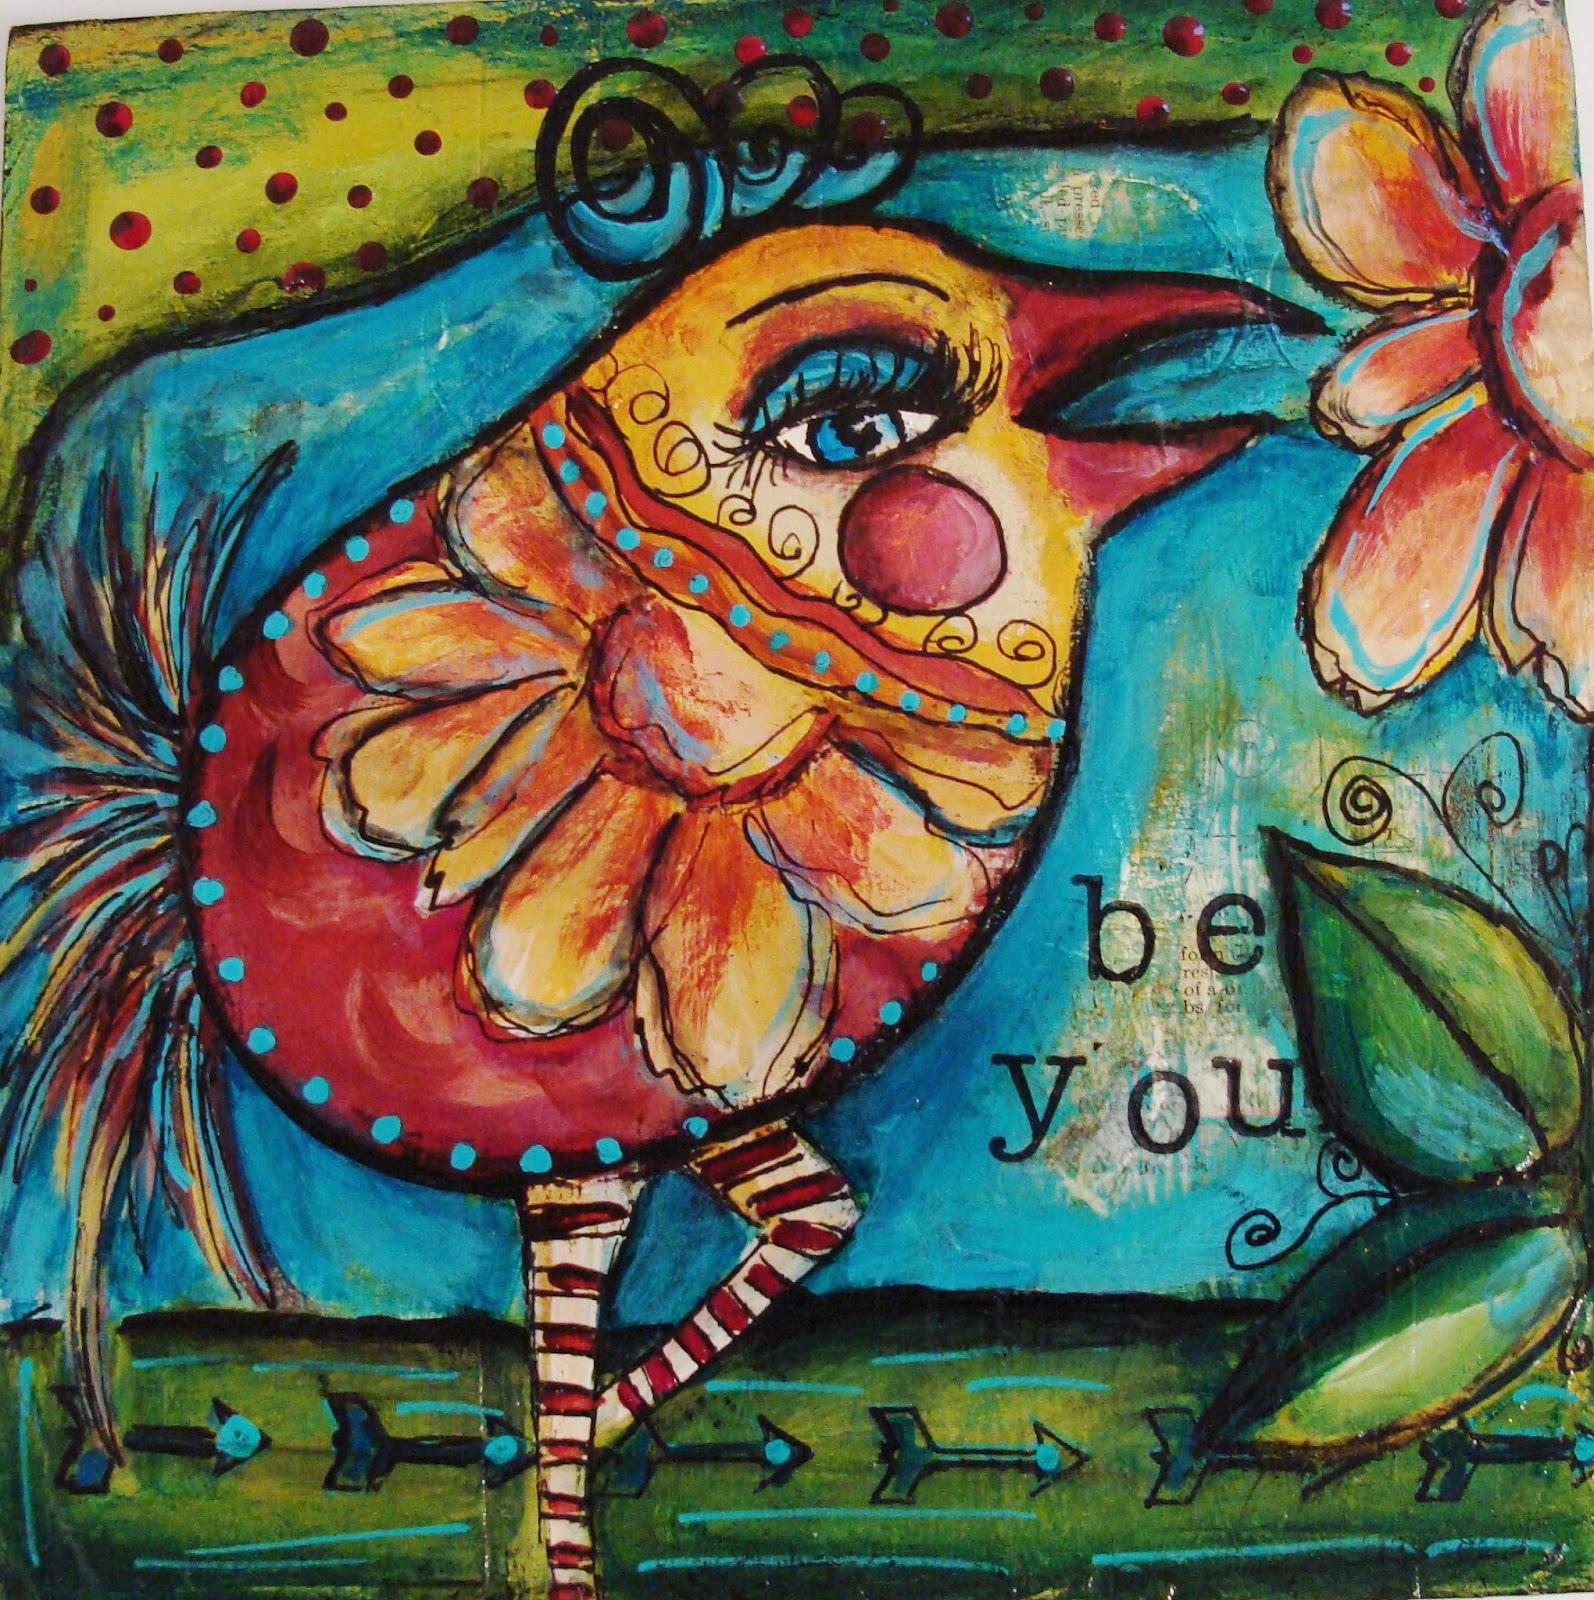 My Art Journal My Online Class With Jodi Ohl--Dirty Flirty Birds....and...More About My September Workshop